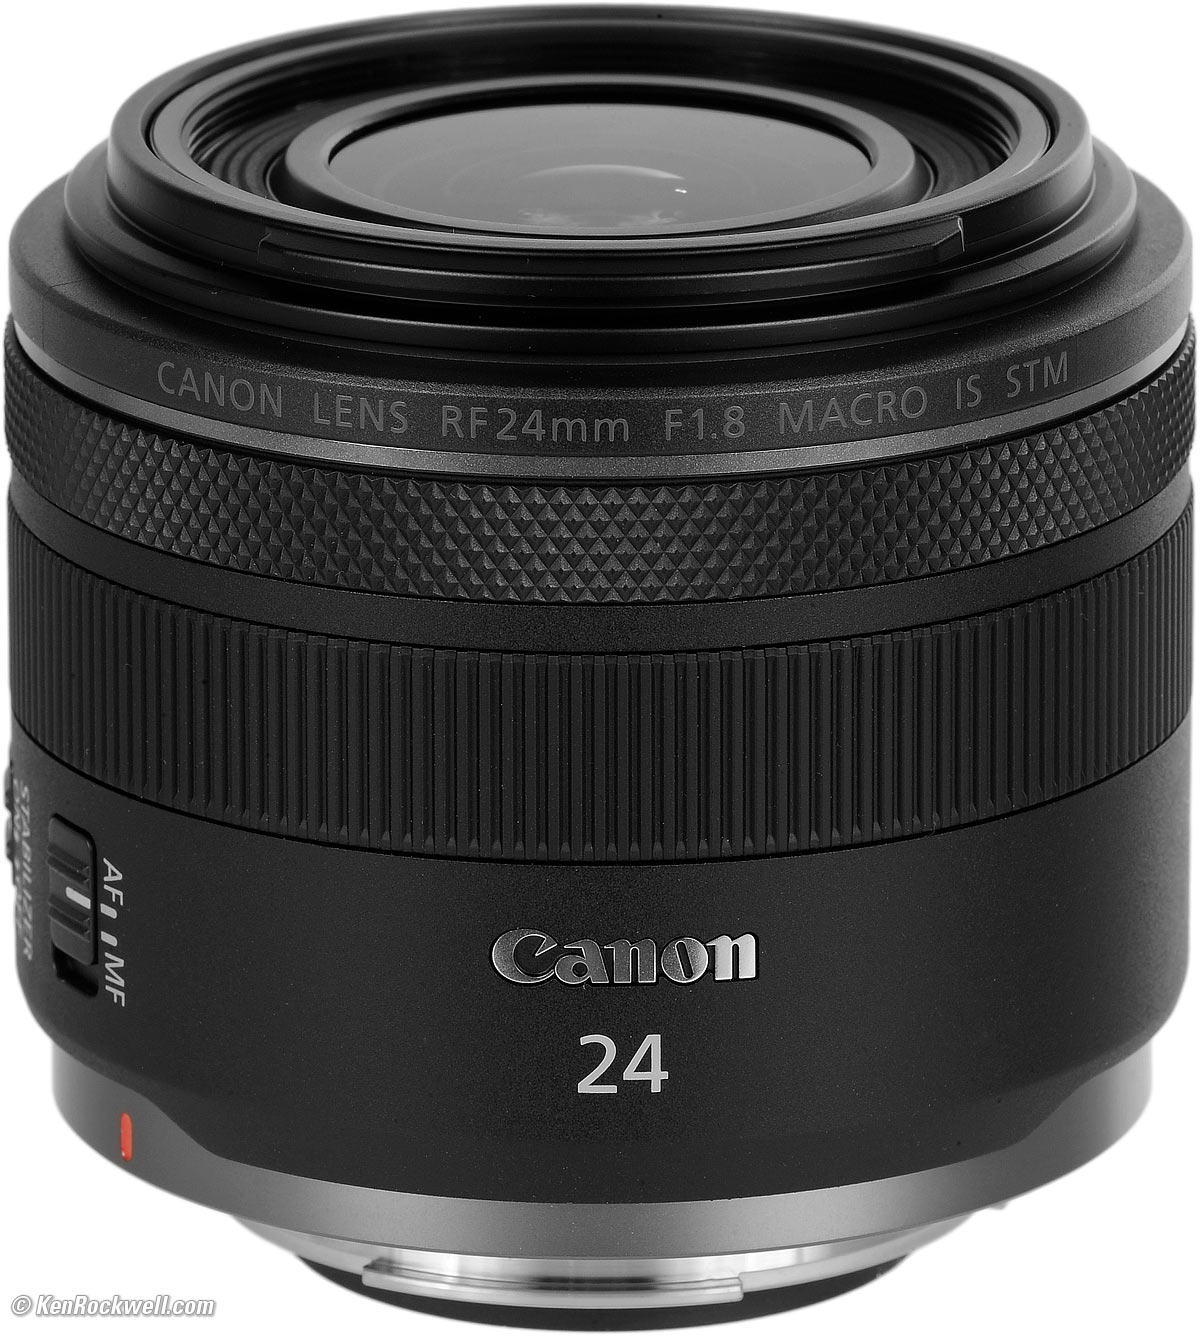 Canon RF 24mm f/1.8 MACRO IS STM Review & Sample Images by Ken 